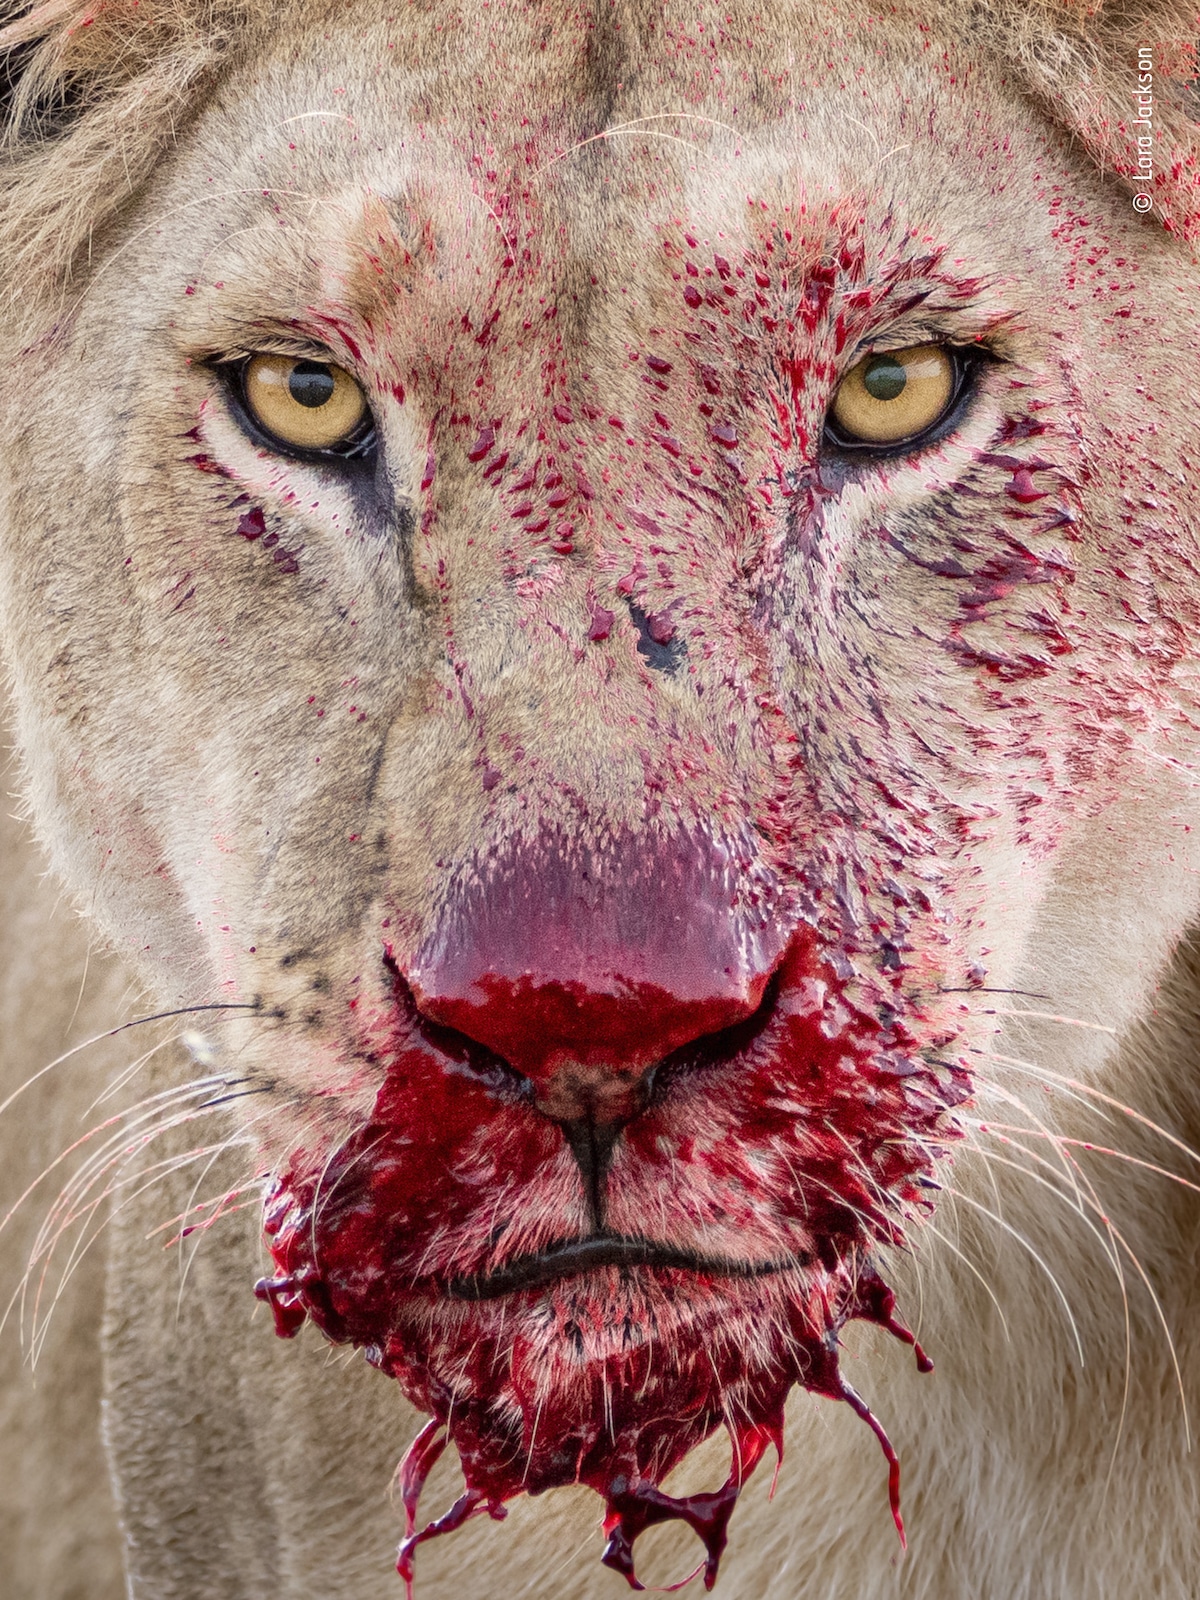 Blood Dripping Down Muzzle of Young Lioness